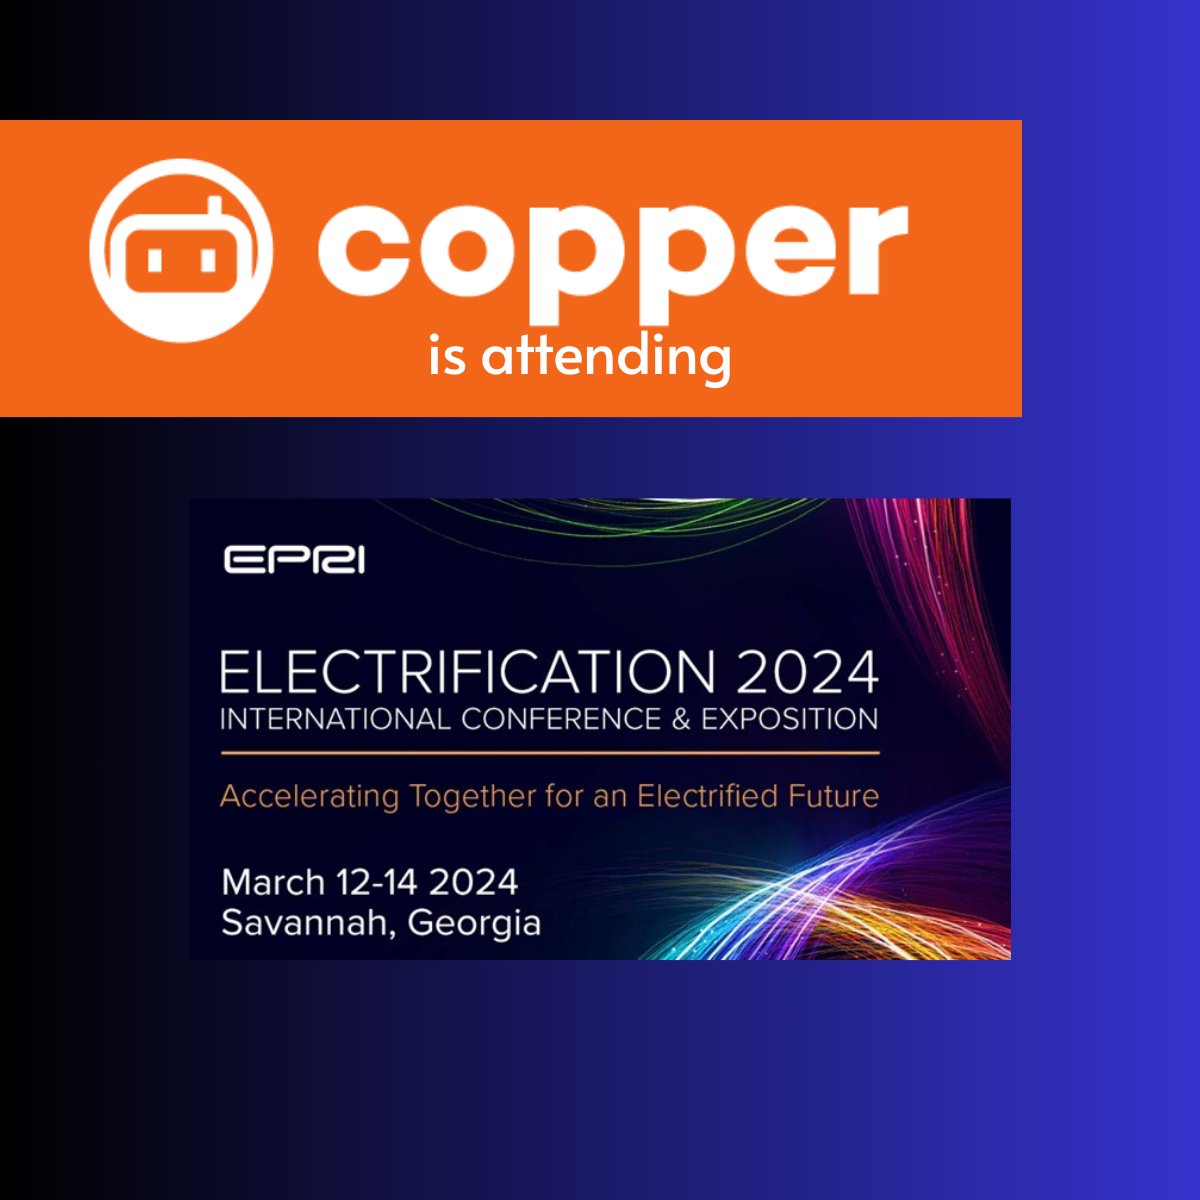 Excited to have Copper CEO Dan Forman kicking things off at @EPRINews 2024 today! This immersive event offers valuable opportunities for education and networking. We hope to see you there! View the agenda here: electrification2024.com/program #CopperLabs #ElectricTogether